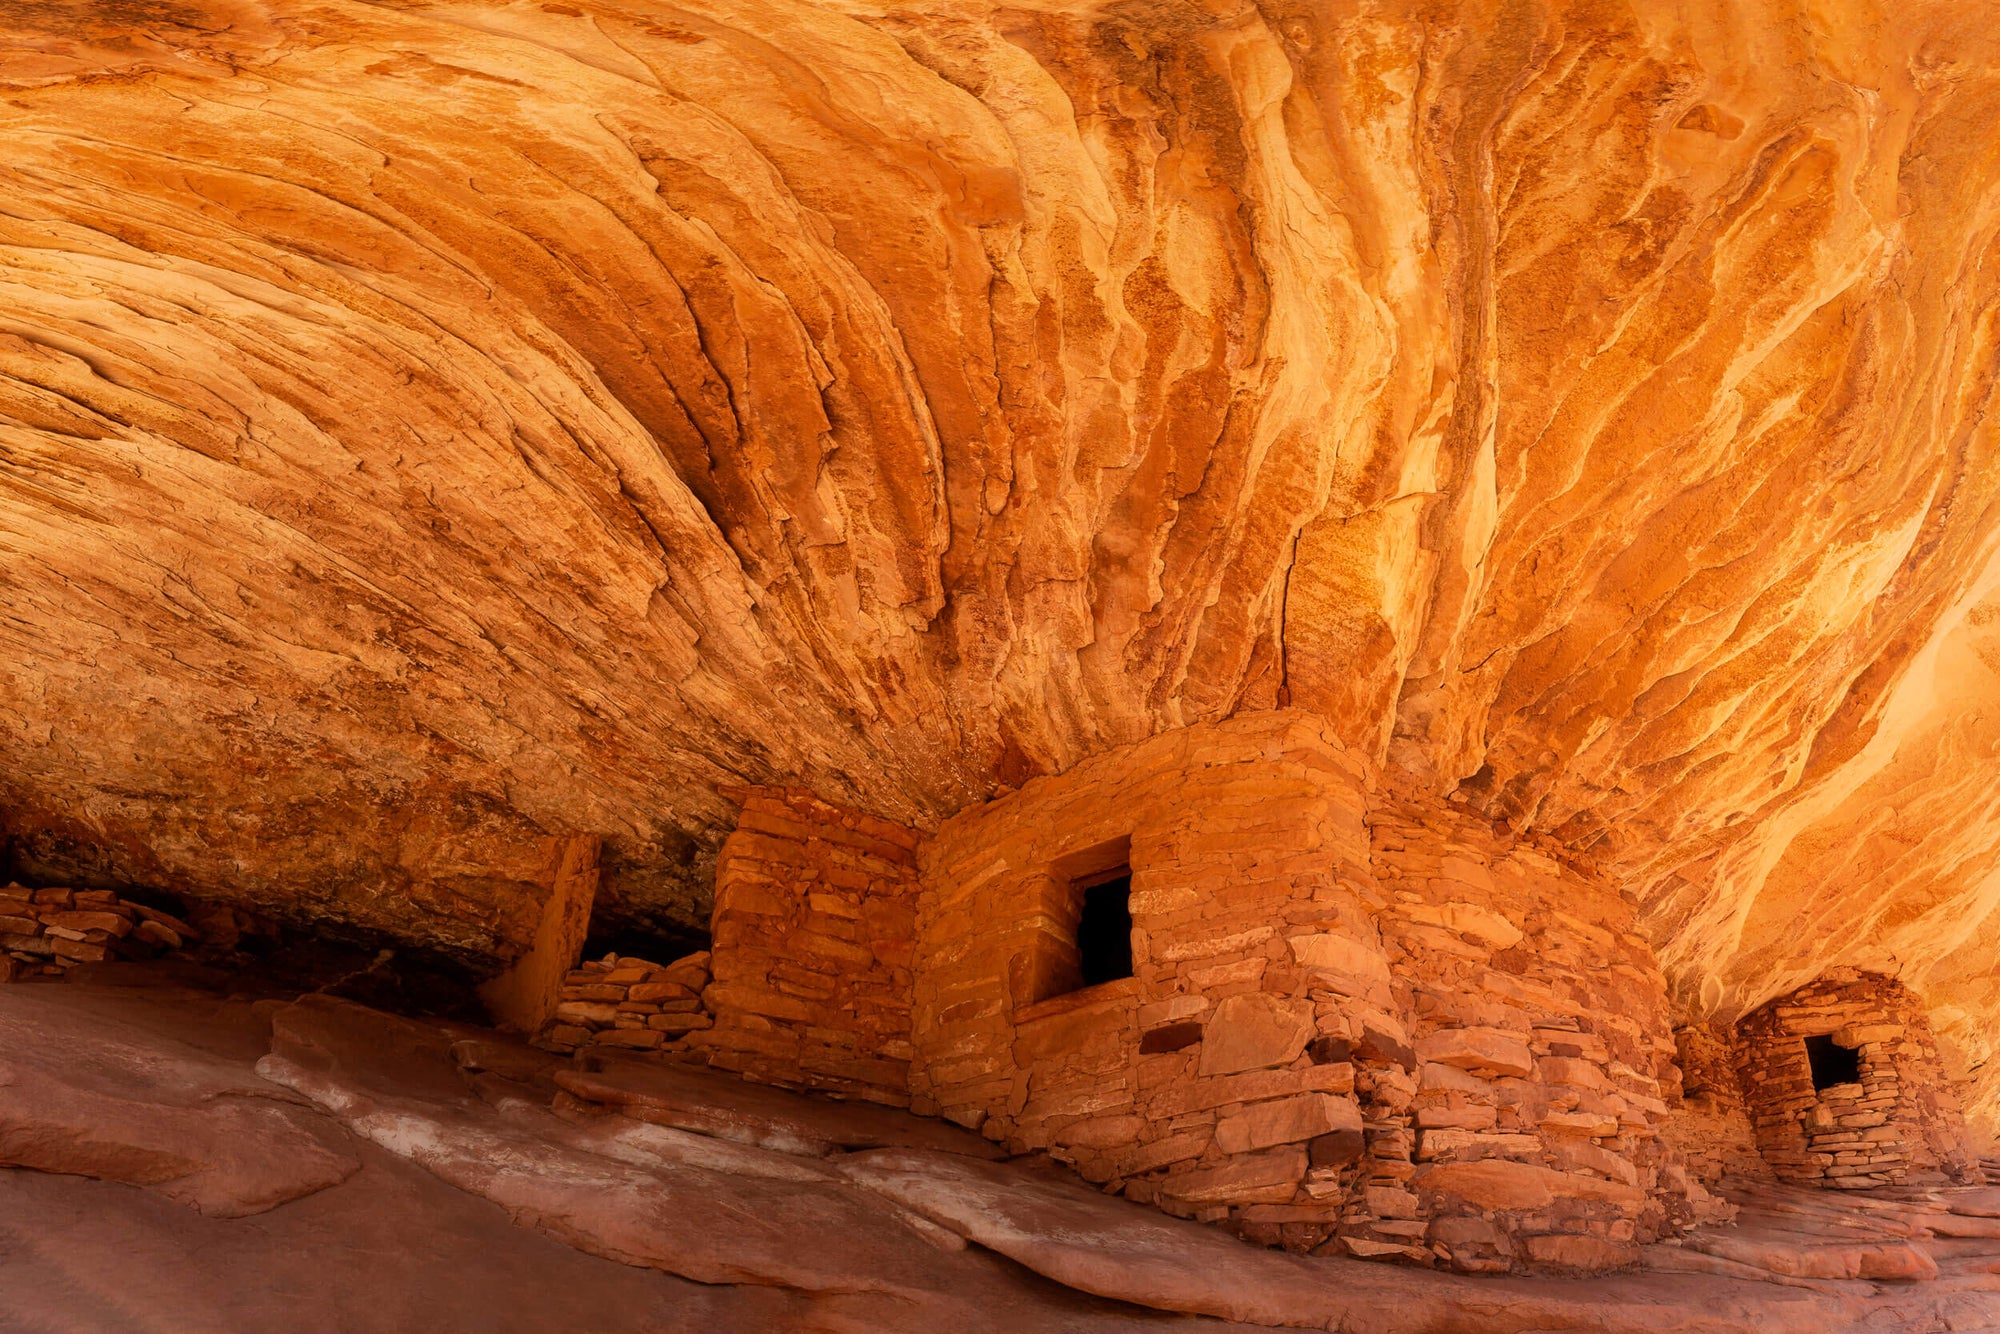 A picture of the House on Fire Anasazi dwelling in Bears Ears Monument.